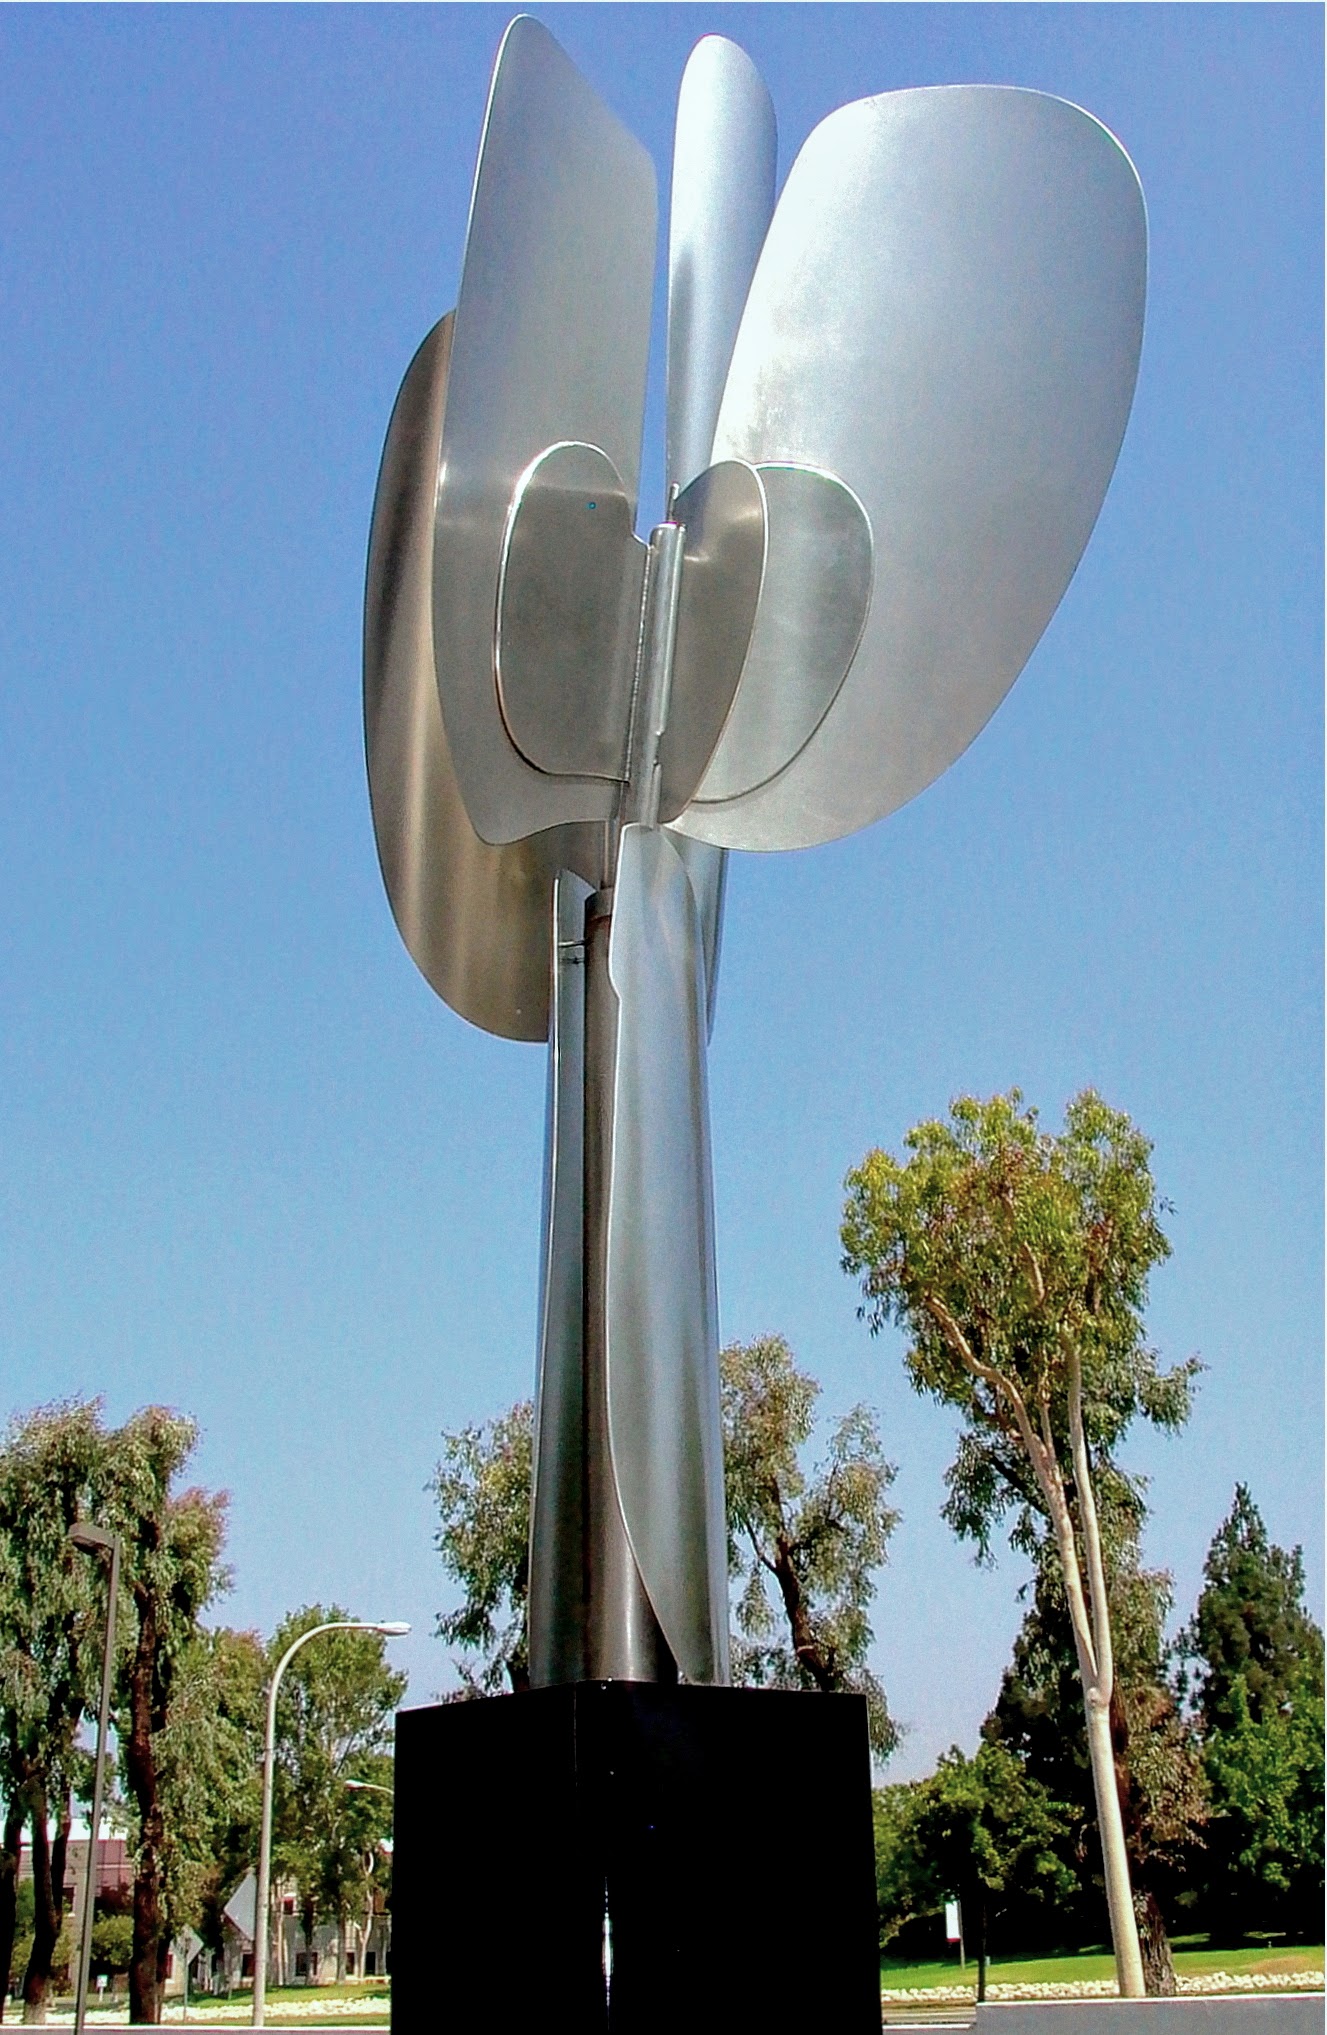 Brea's Wind Sculpture, George Baker, South Side of Imperial, Between Saturn & Valencia